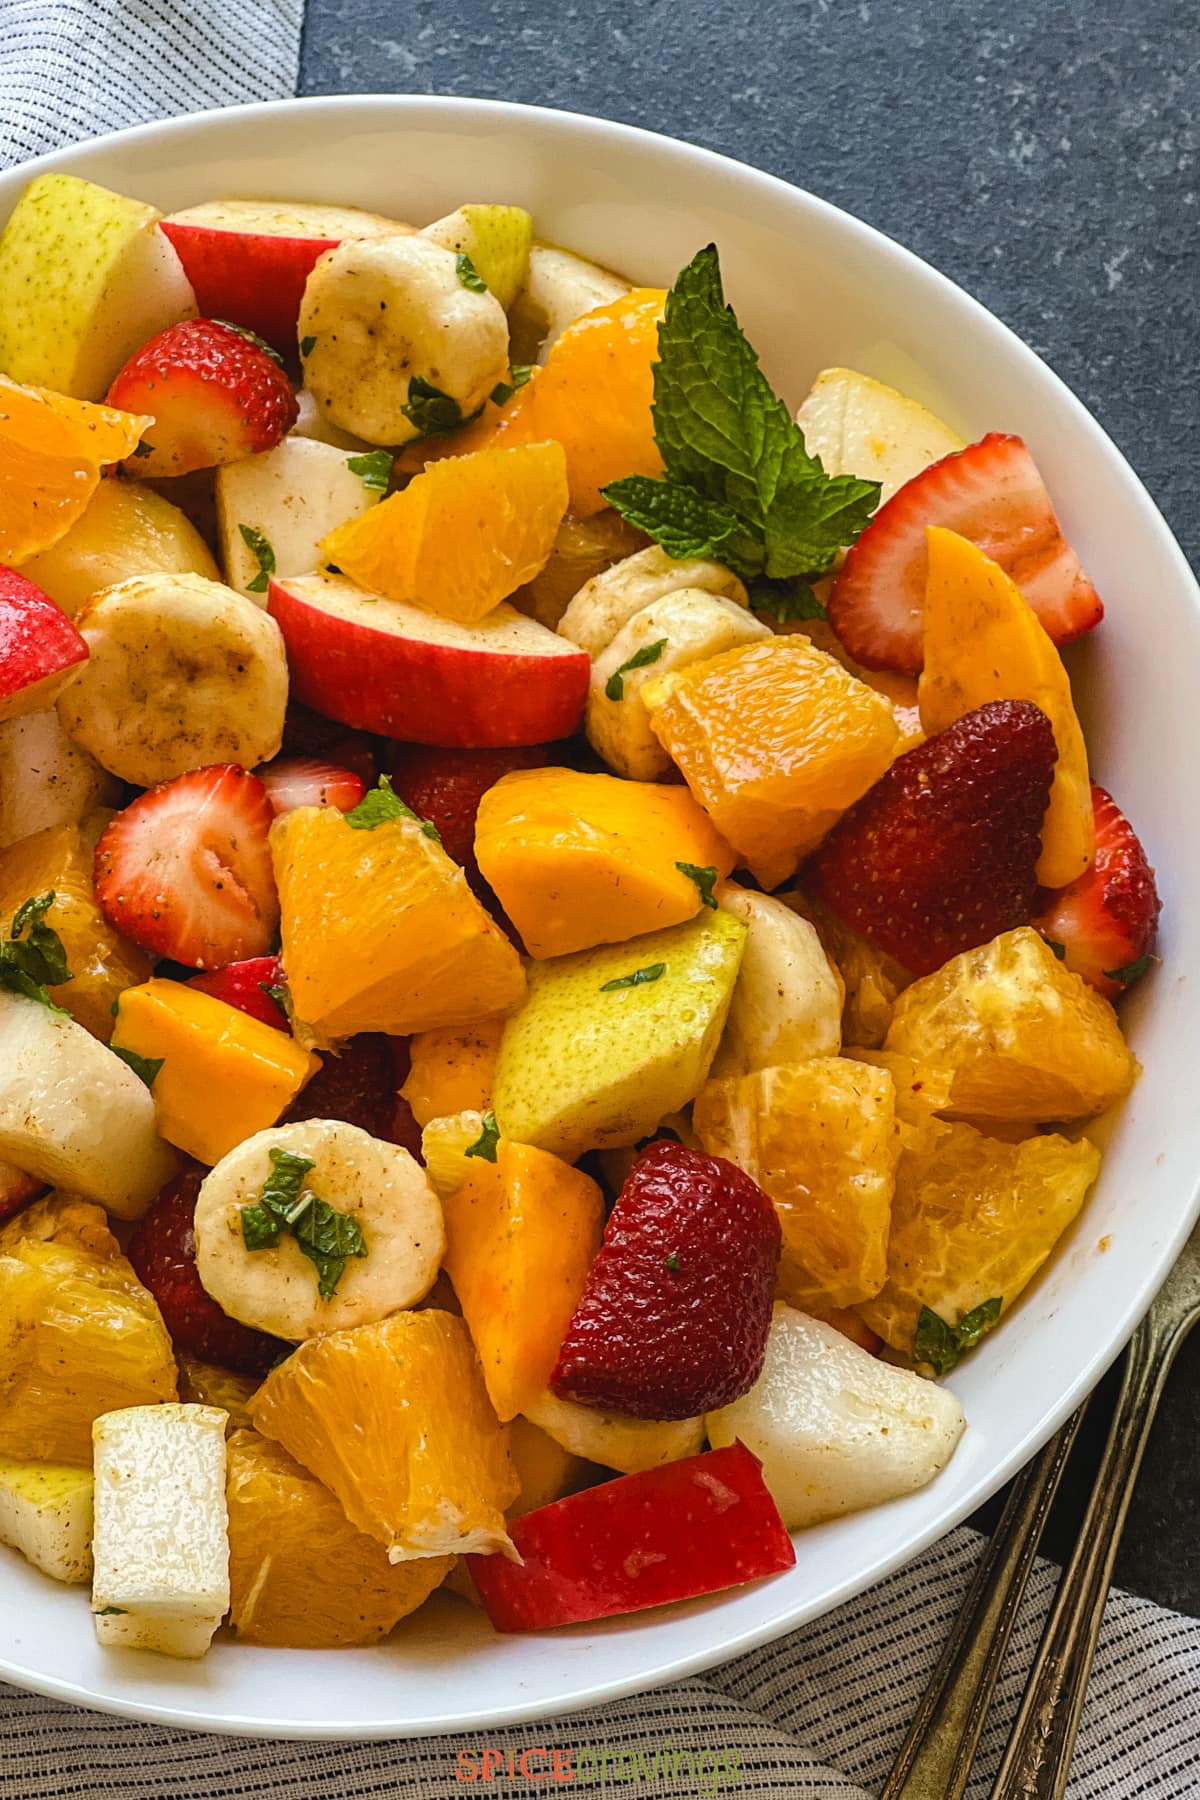 Chopped fruit salad in white bowl seasoned with spices and mint